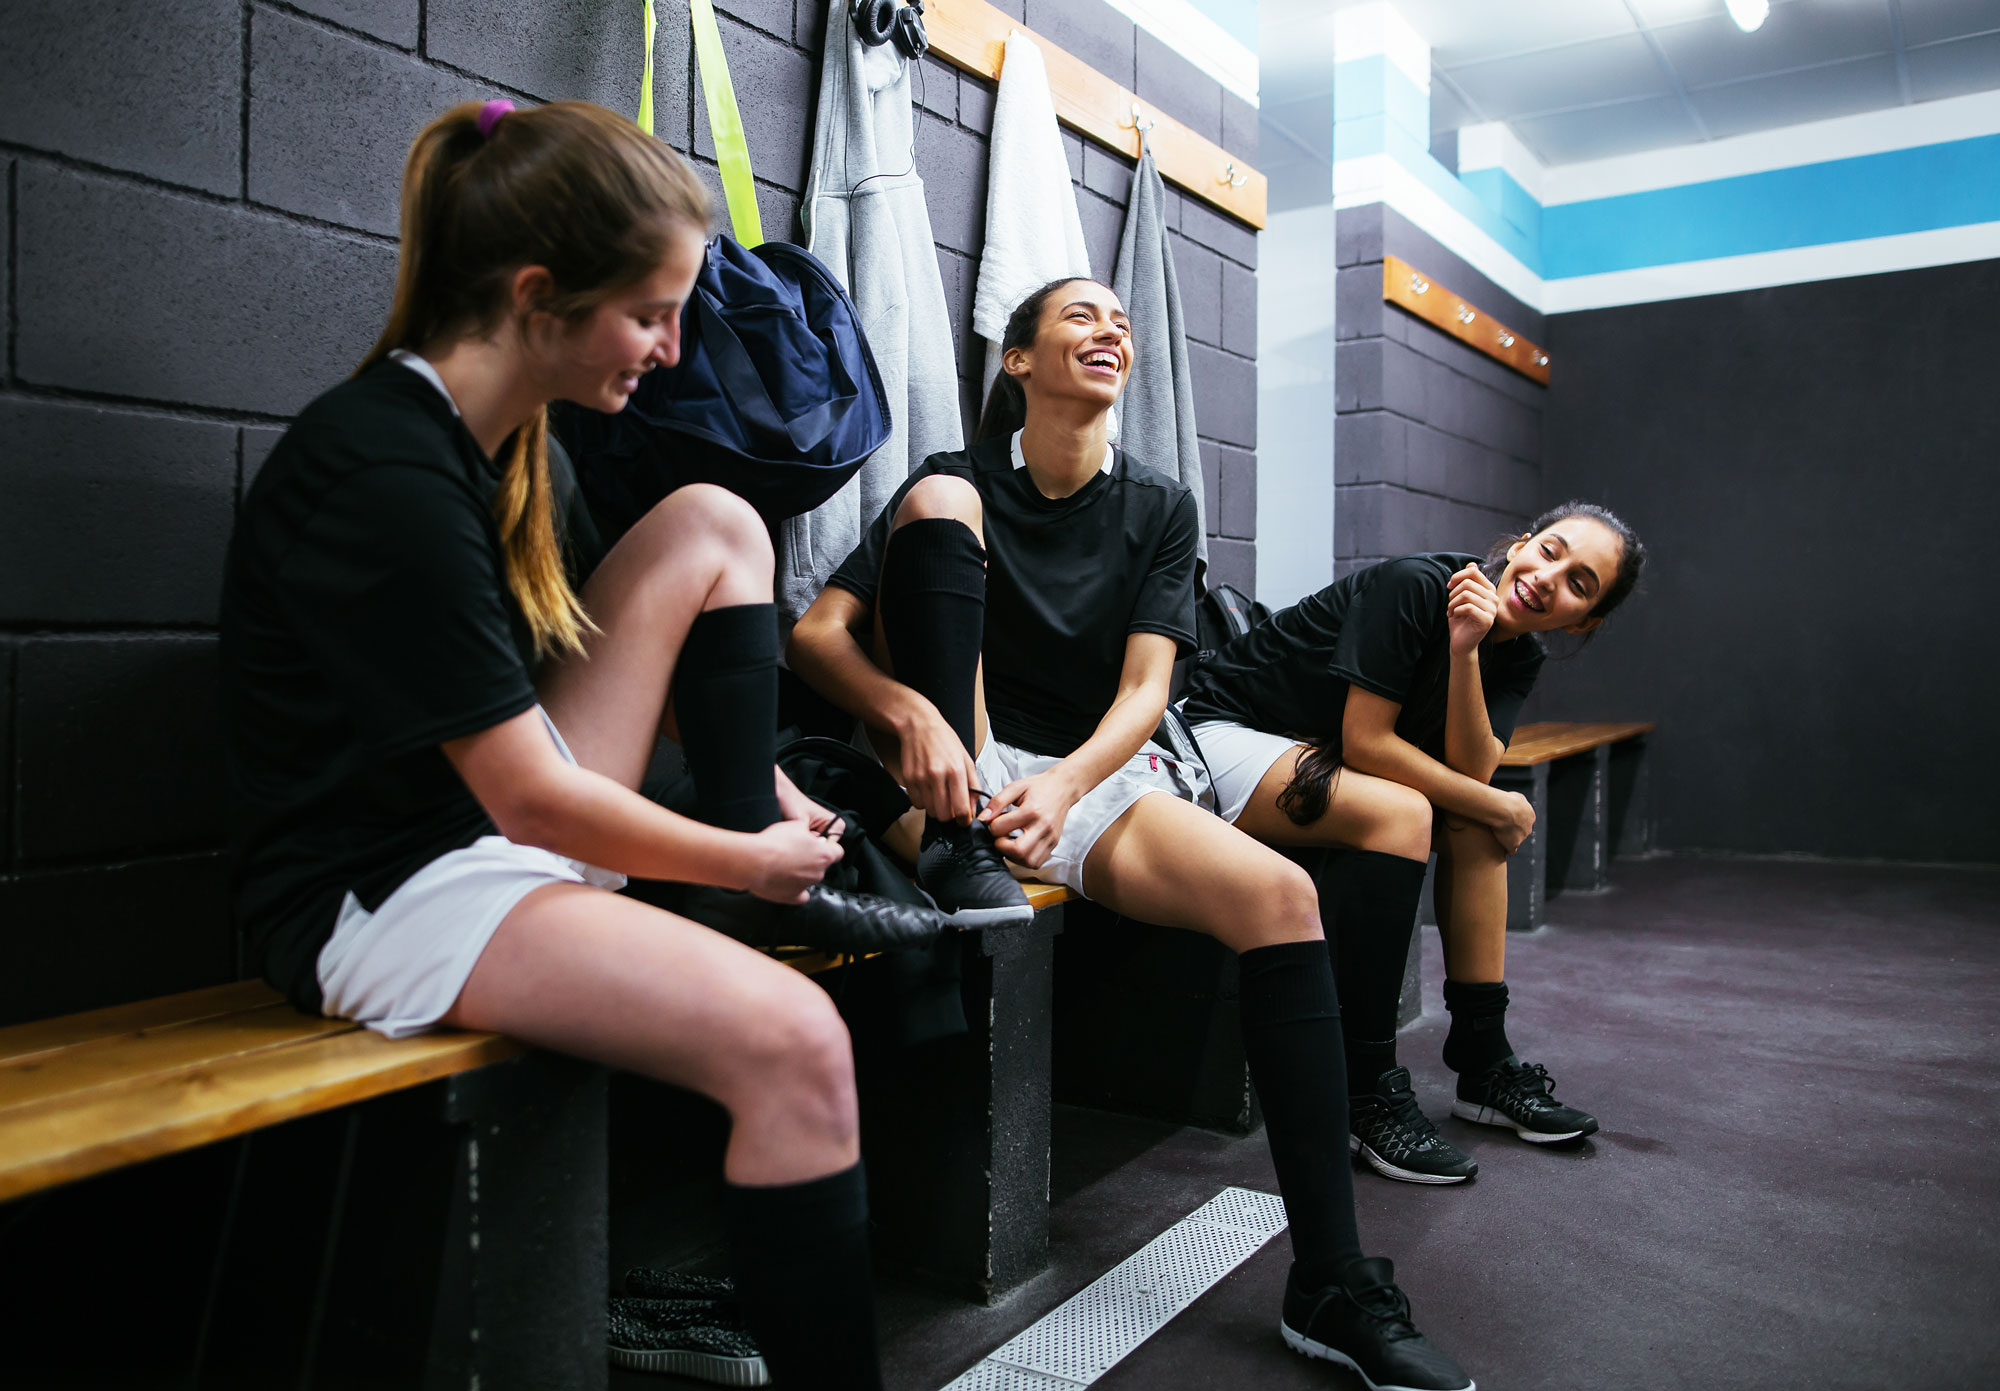 Three young athletes lacing up their shoes in the locker room